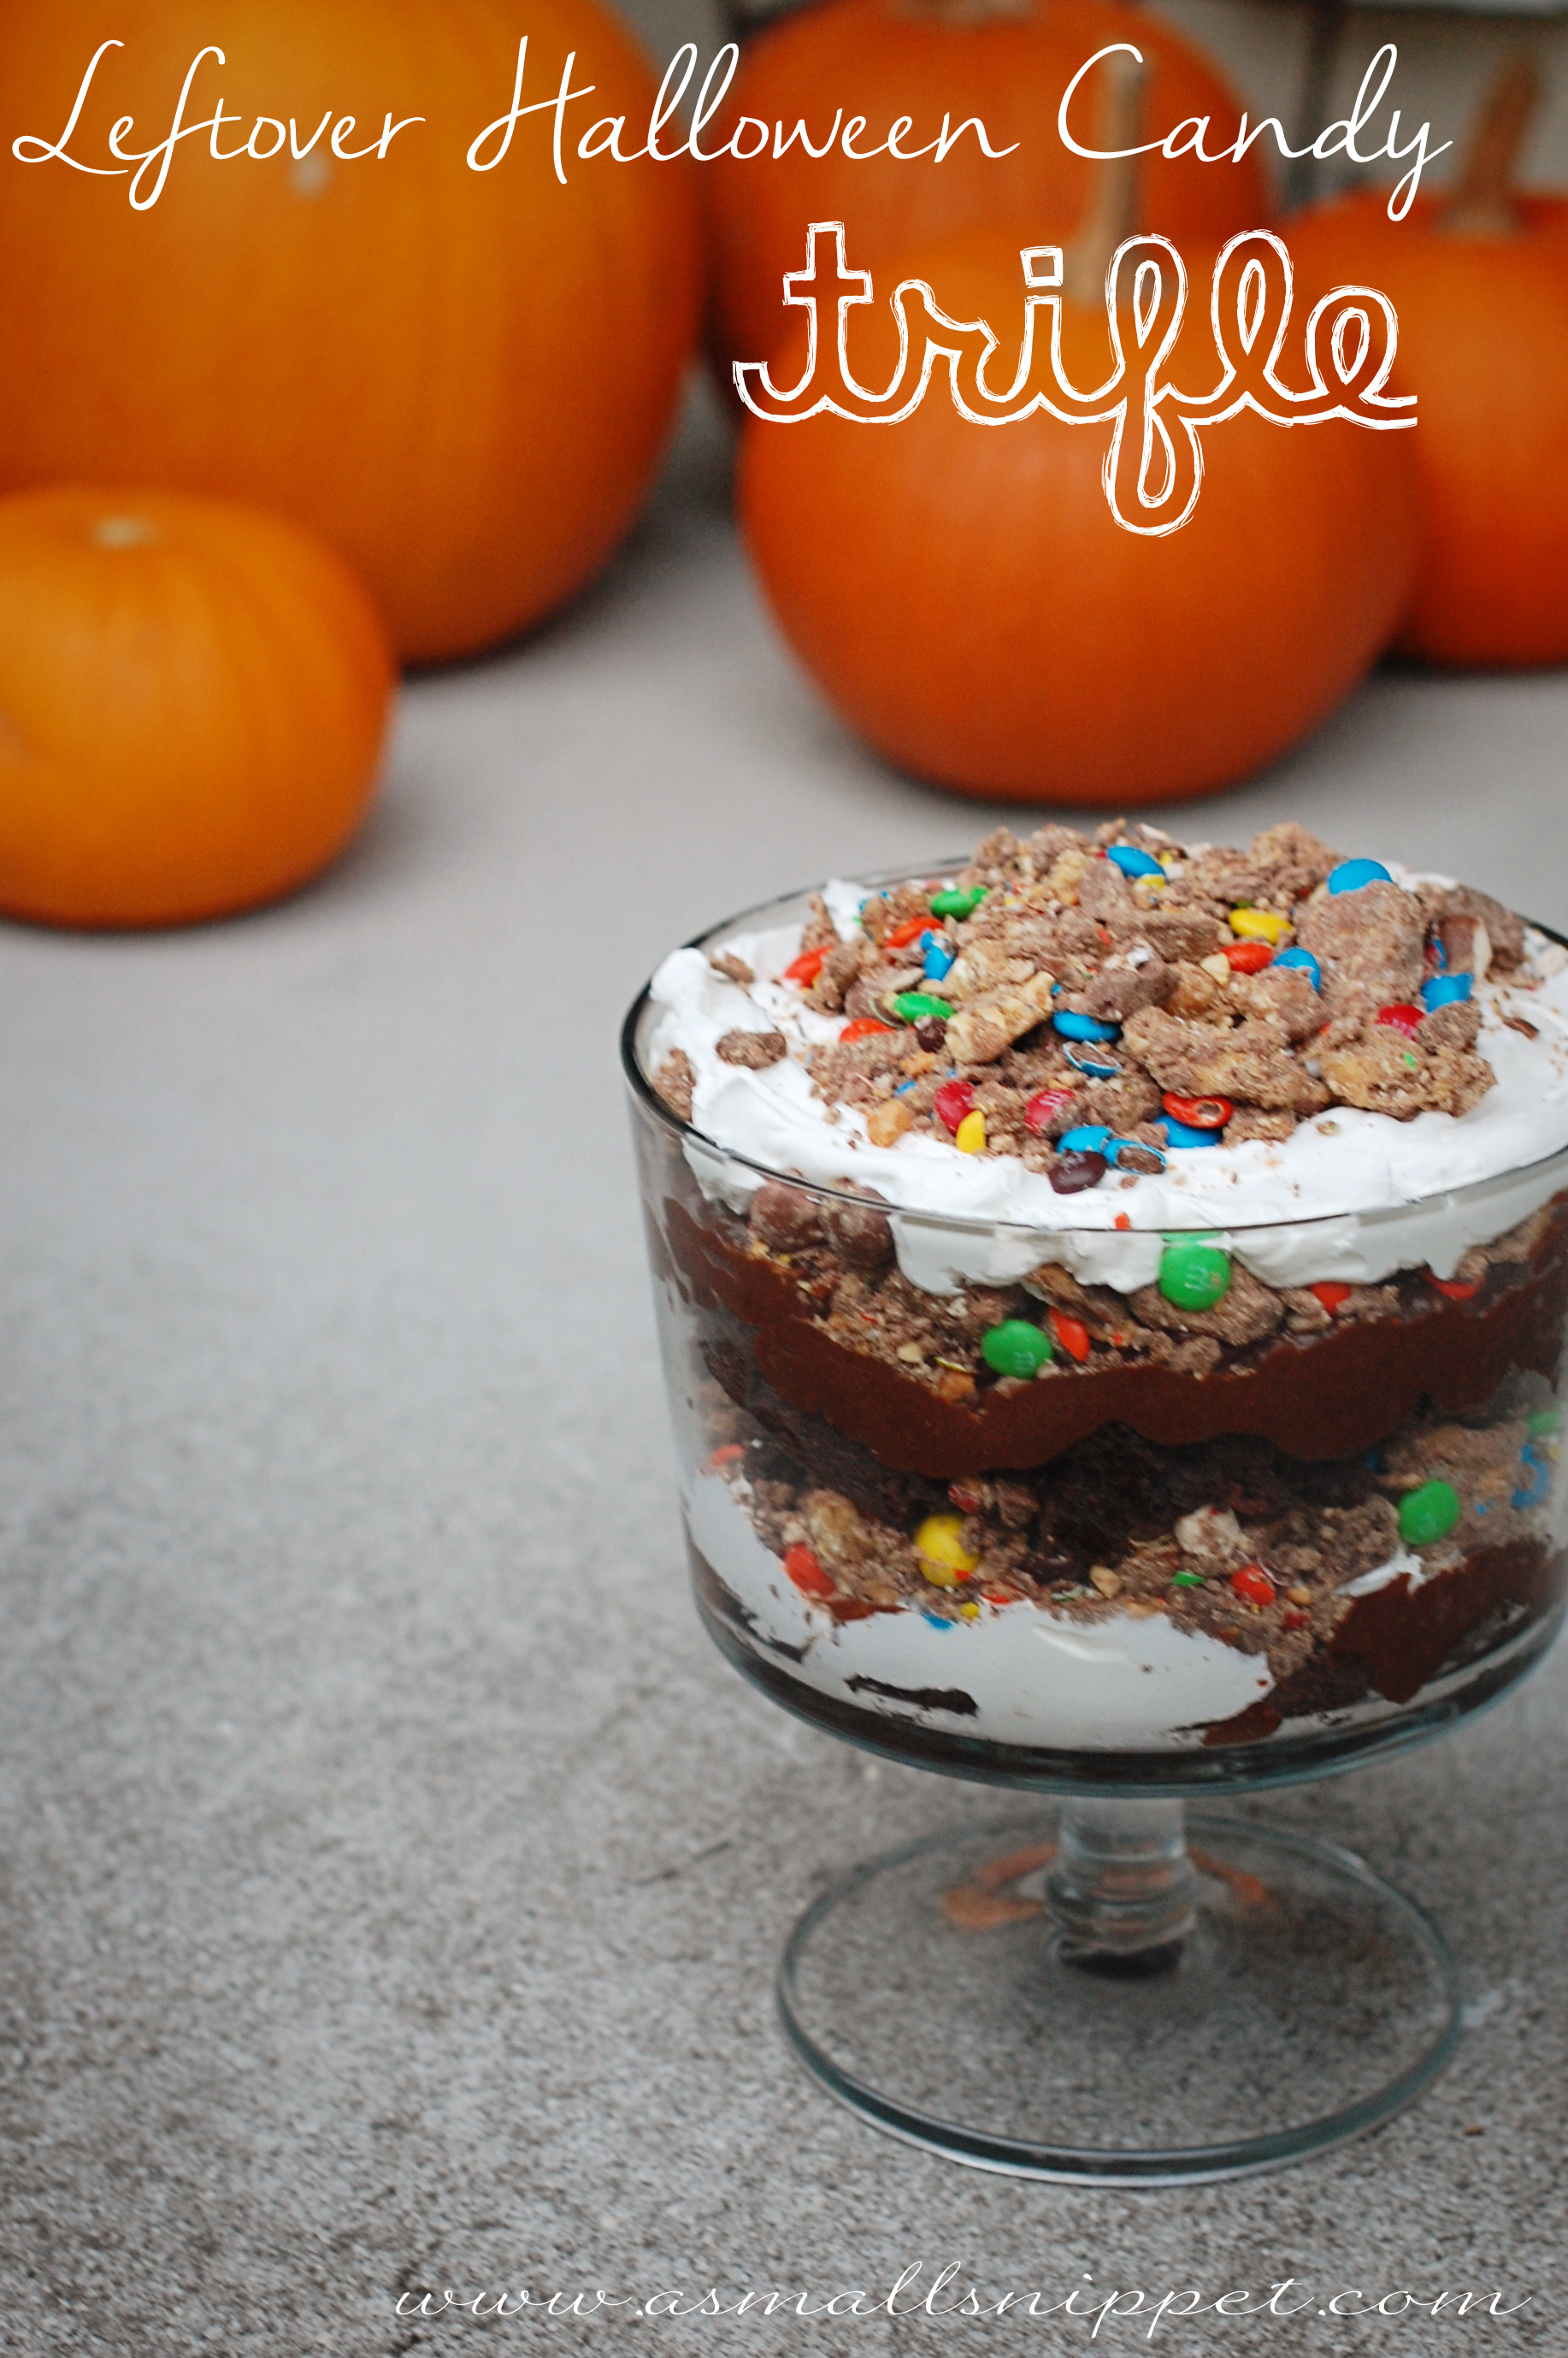 Leftover Halloween Candy Trifle | A Small Snippet